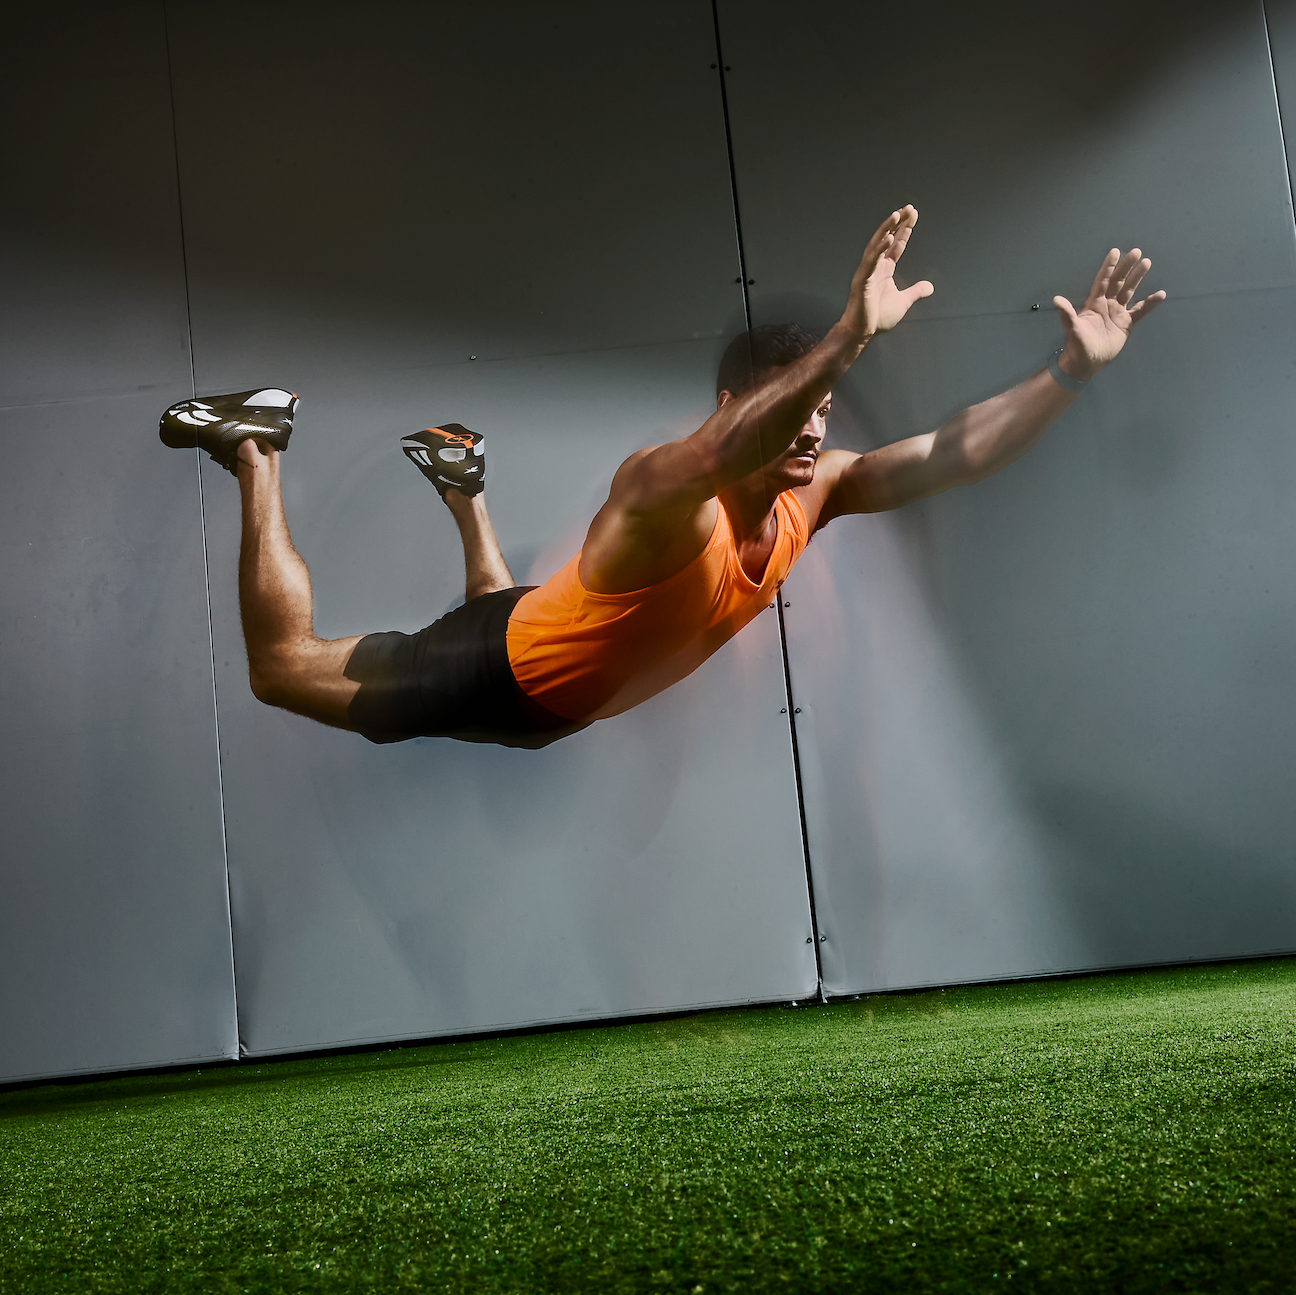 Use Plyometrics to Power Up Your Workouts